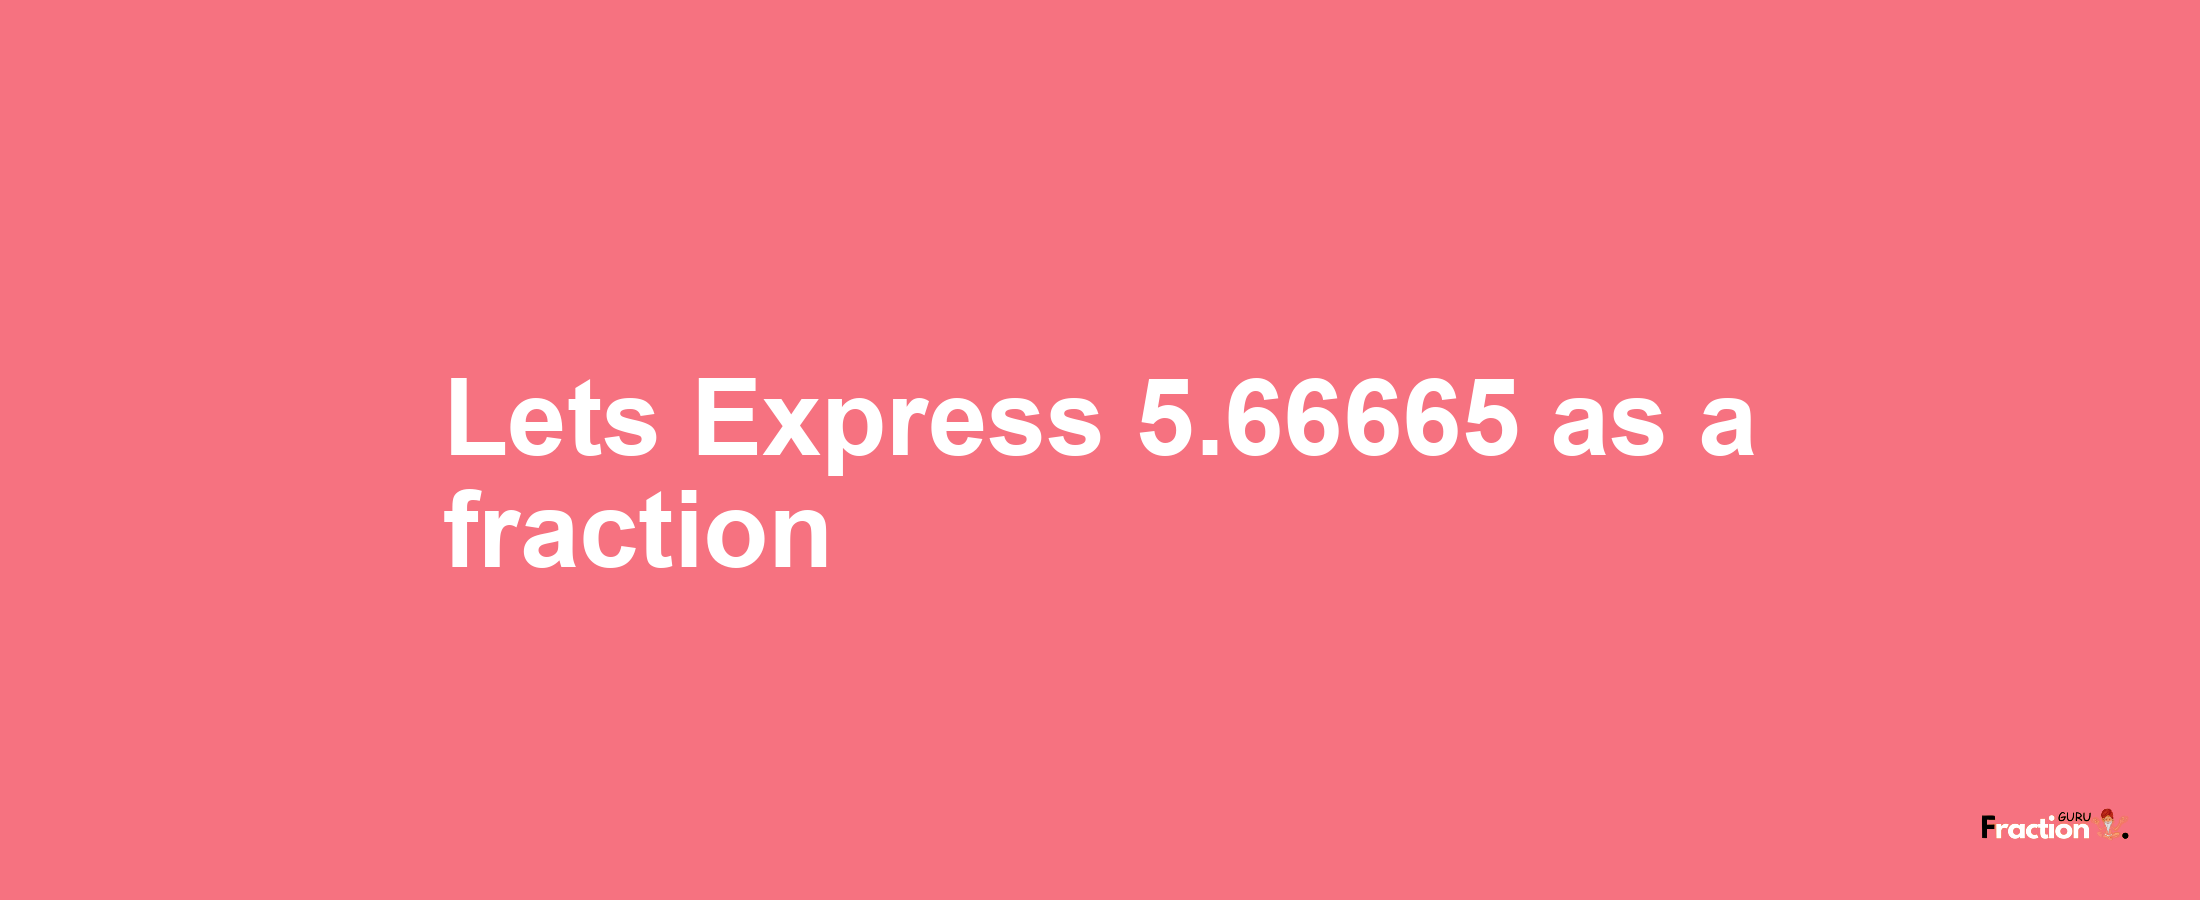 Lets Express 5.66665 as afraction